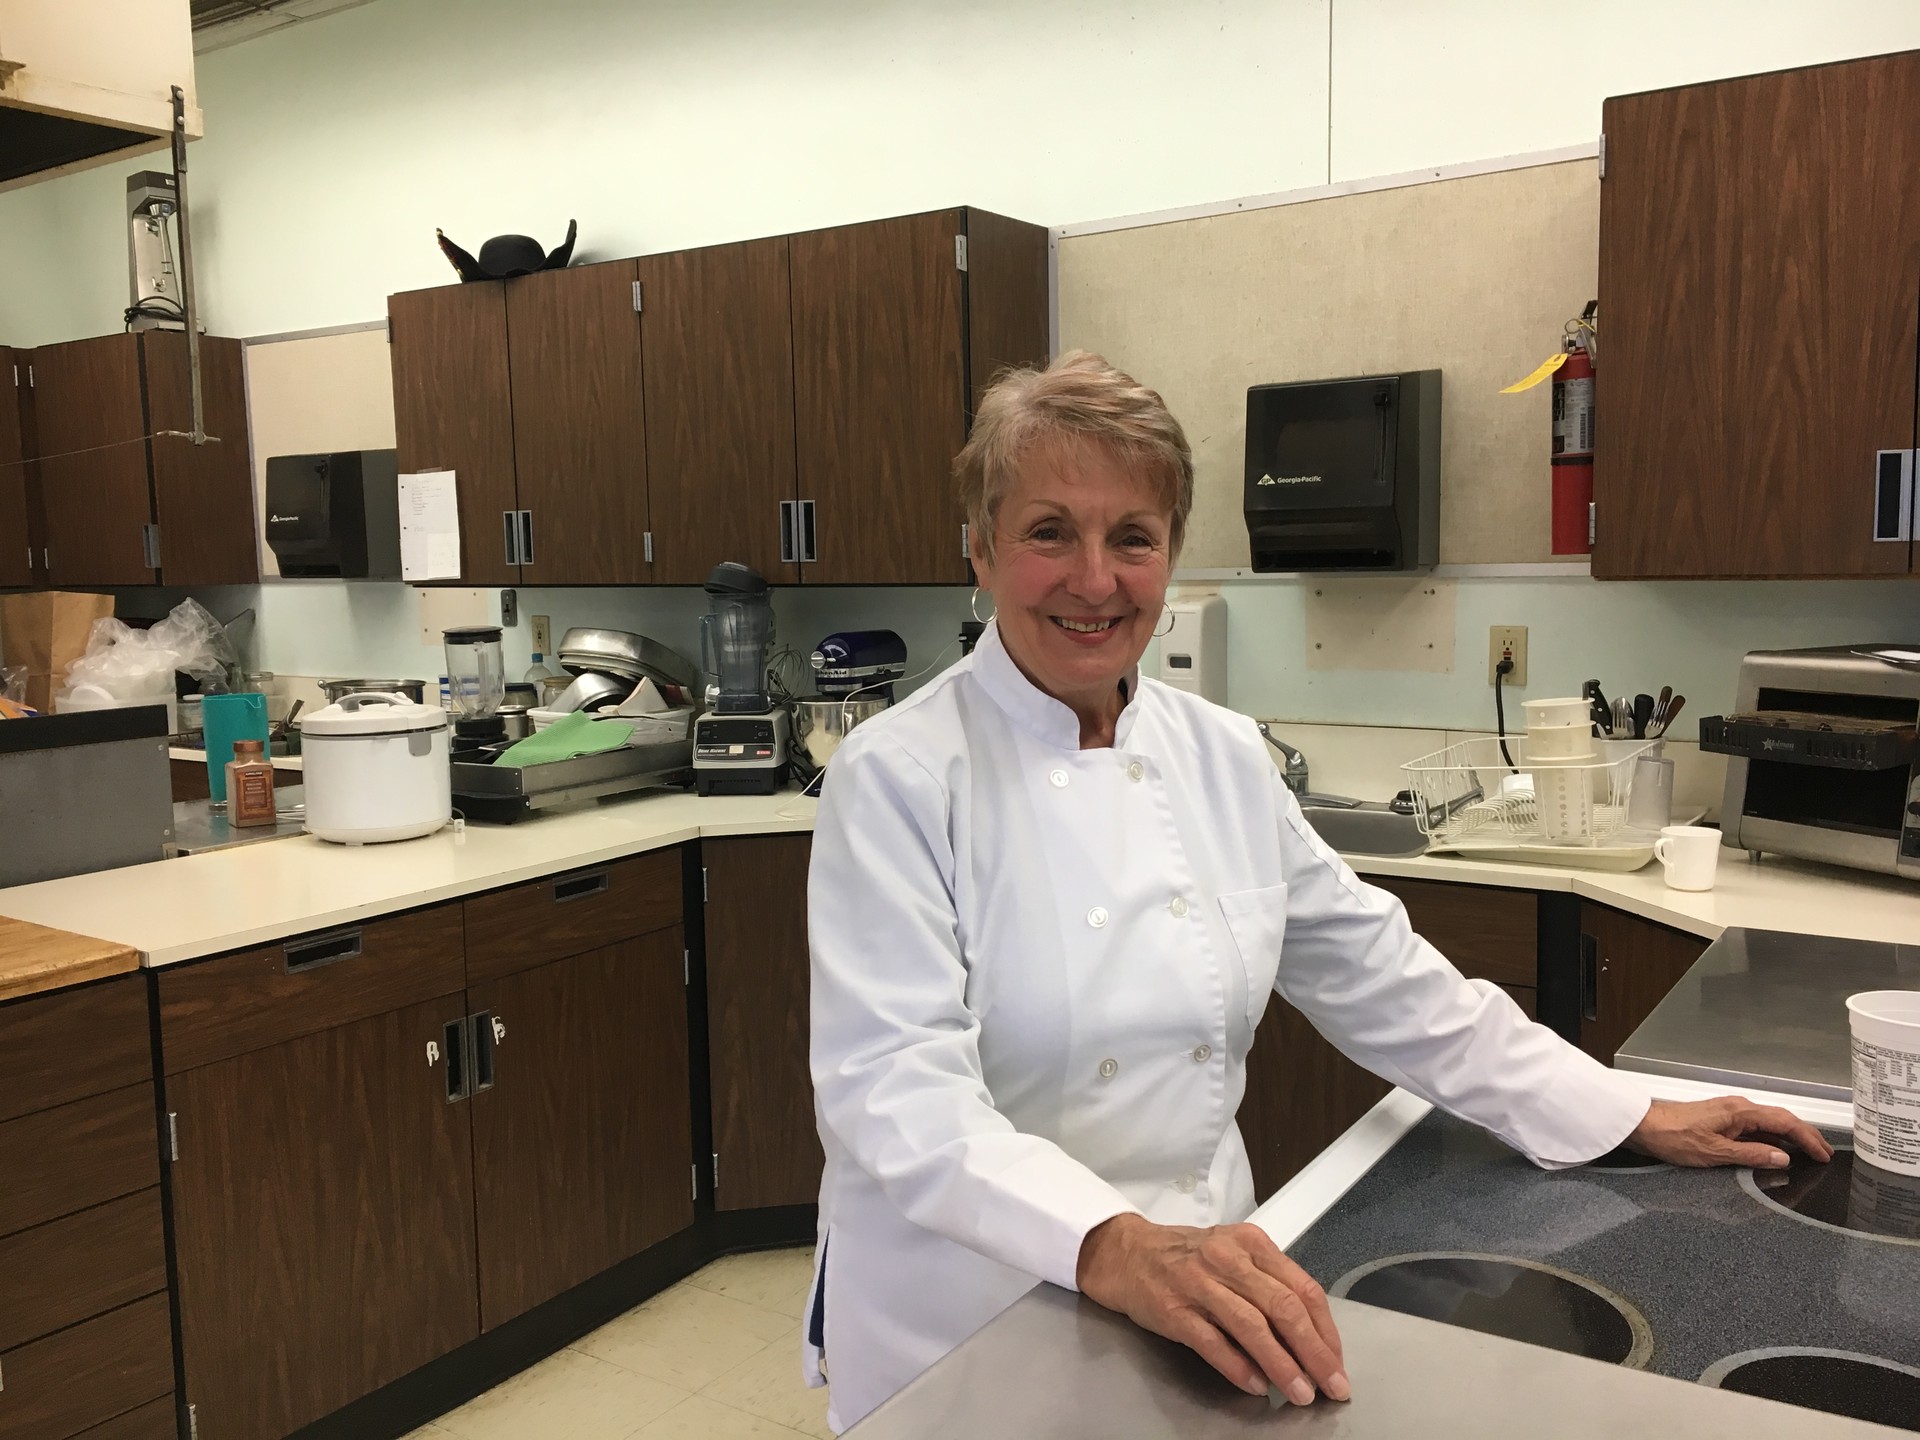 Judy Dolphin has taught culinary classes at Greenville High for 20 years. She also coaches cheerleading, teaches Leadership, yearbook, and computer classes. Her teams have taken second place in state competitions twice, but this is the first year they’ve won.